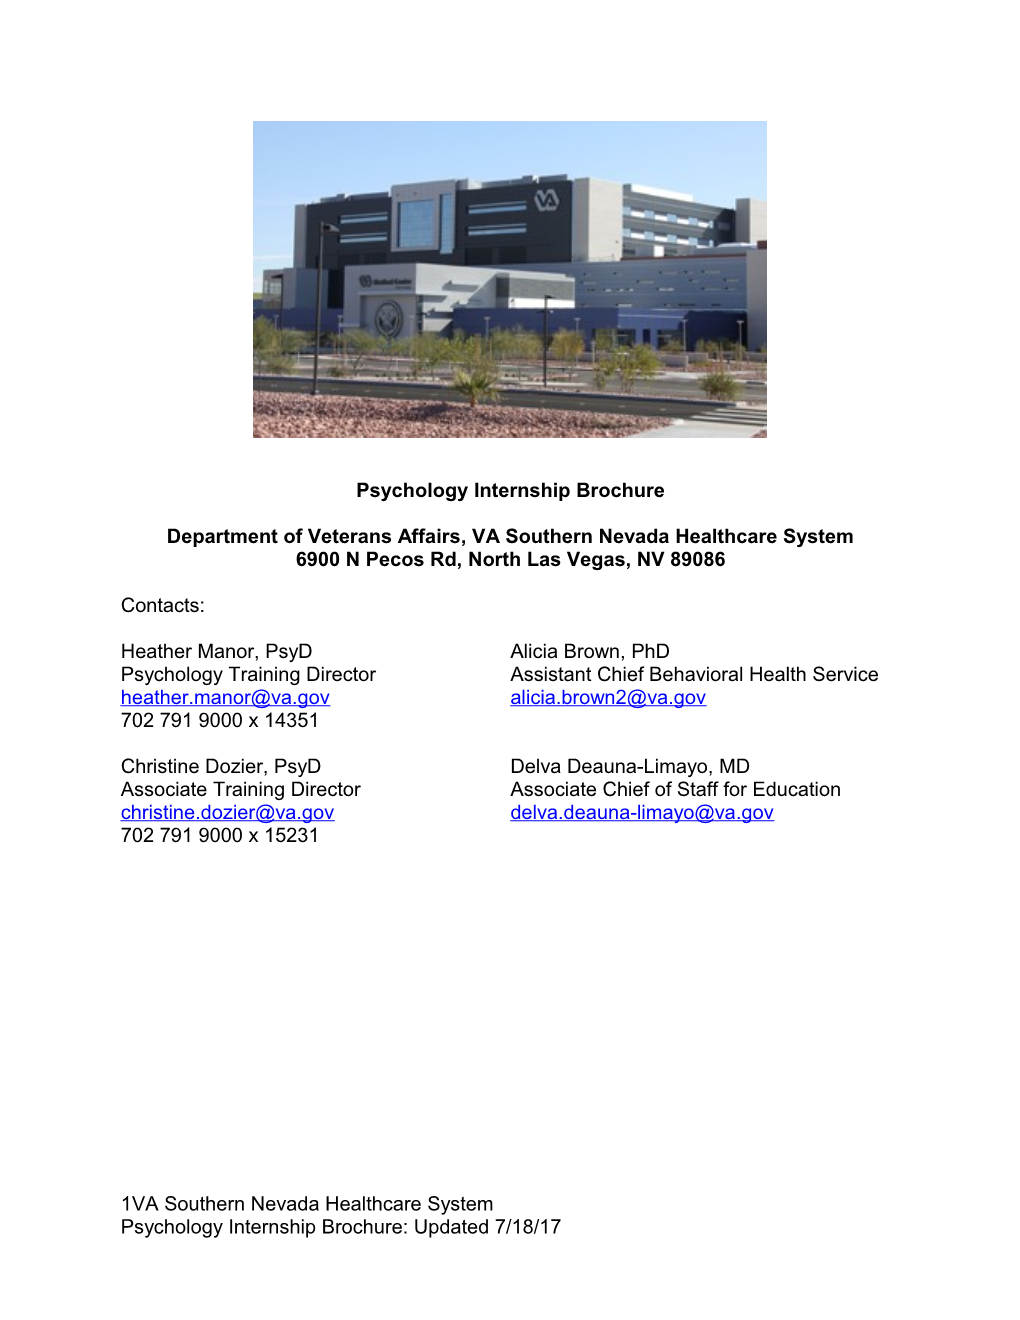 Department of Veterans Affairs, VA Southern Nevada Healthcare System